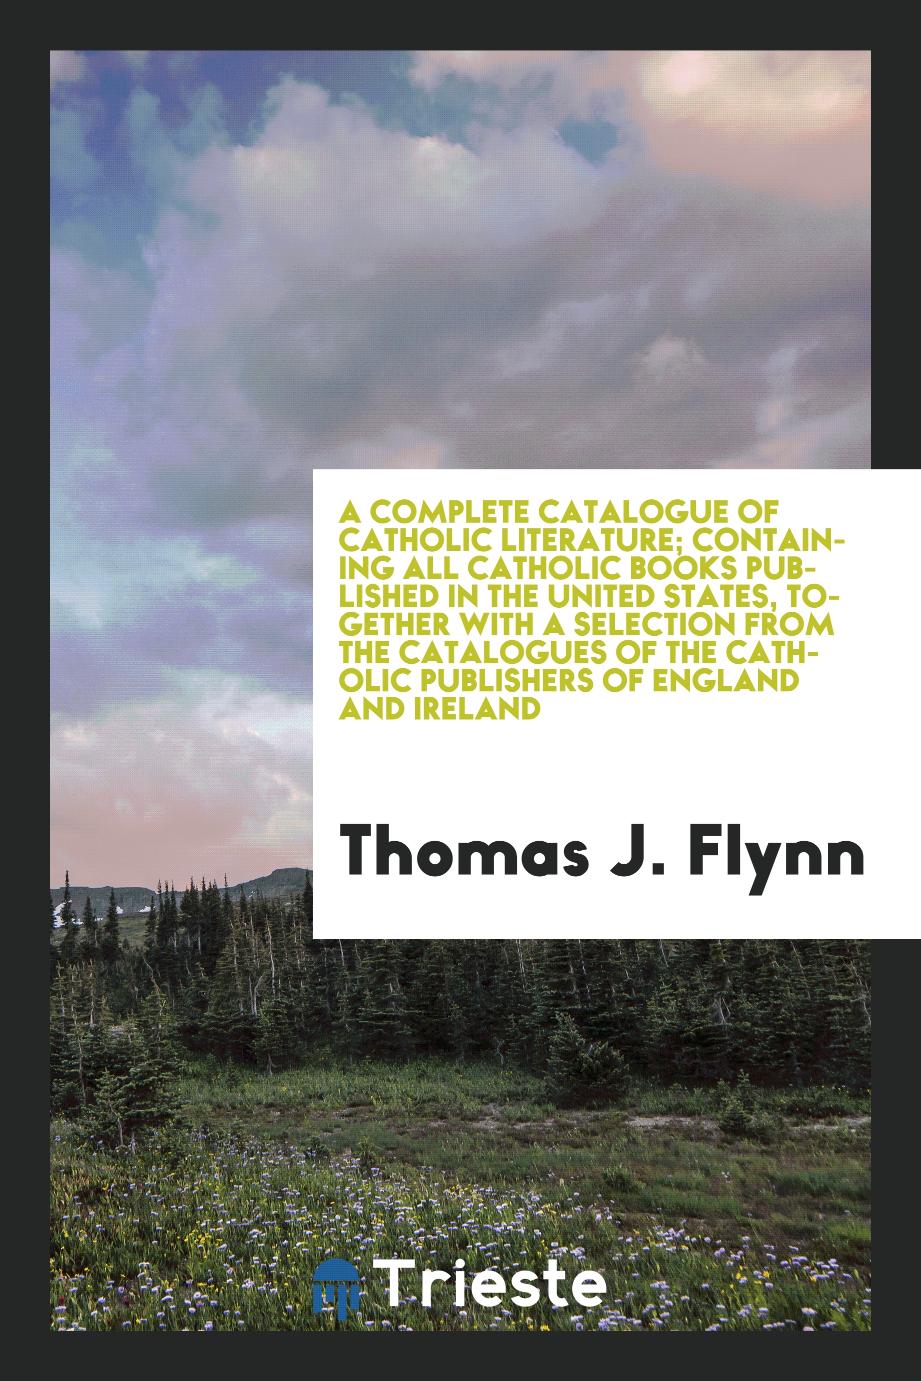 Thomas J. Flynn - A complete catalogue of Catholic literature; containing all Catholic books published in the United States, together with a selection from the catalogues of the Catholic publishers of England and Ireland